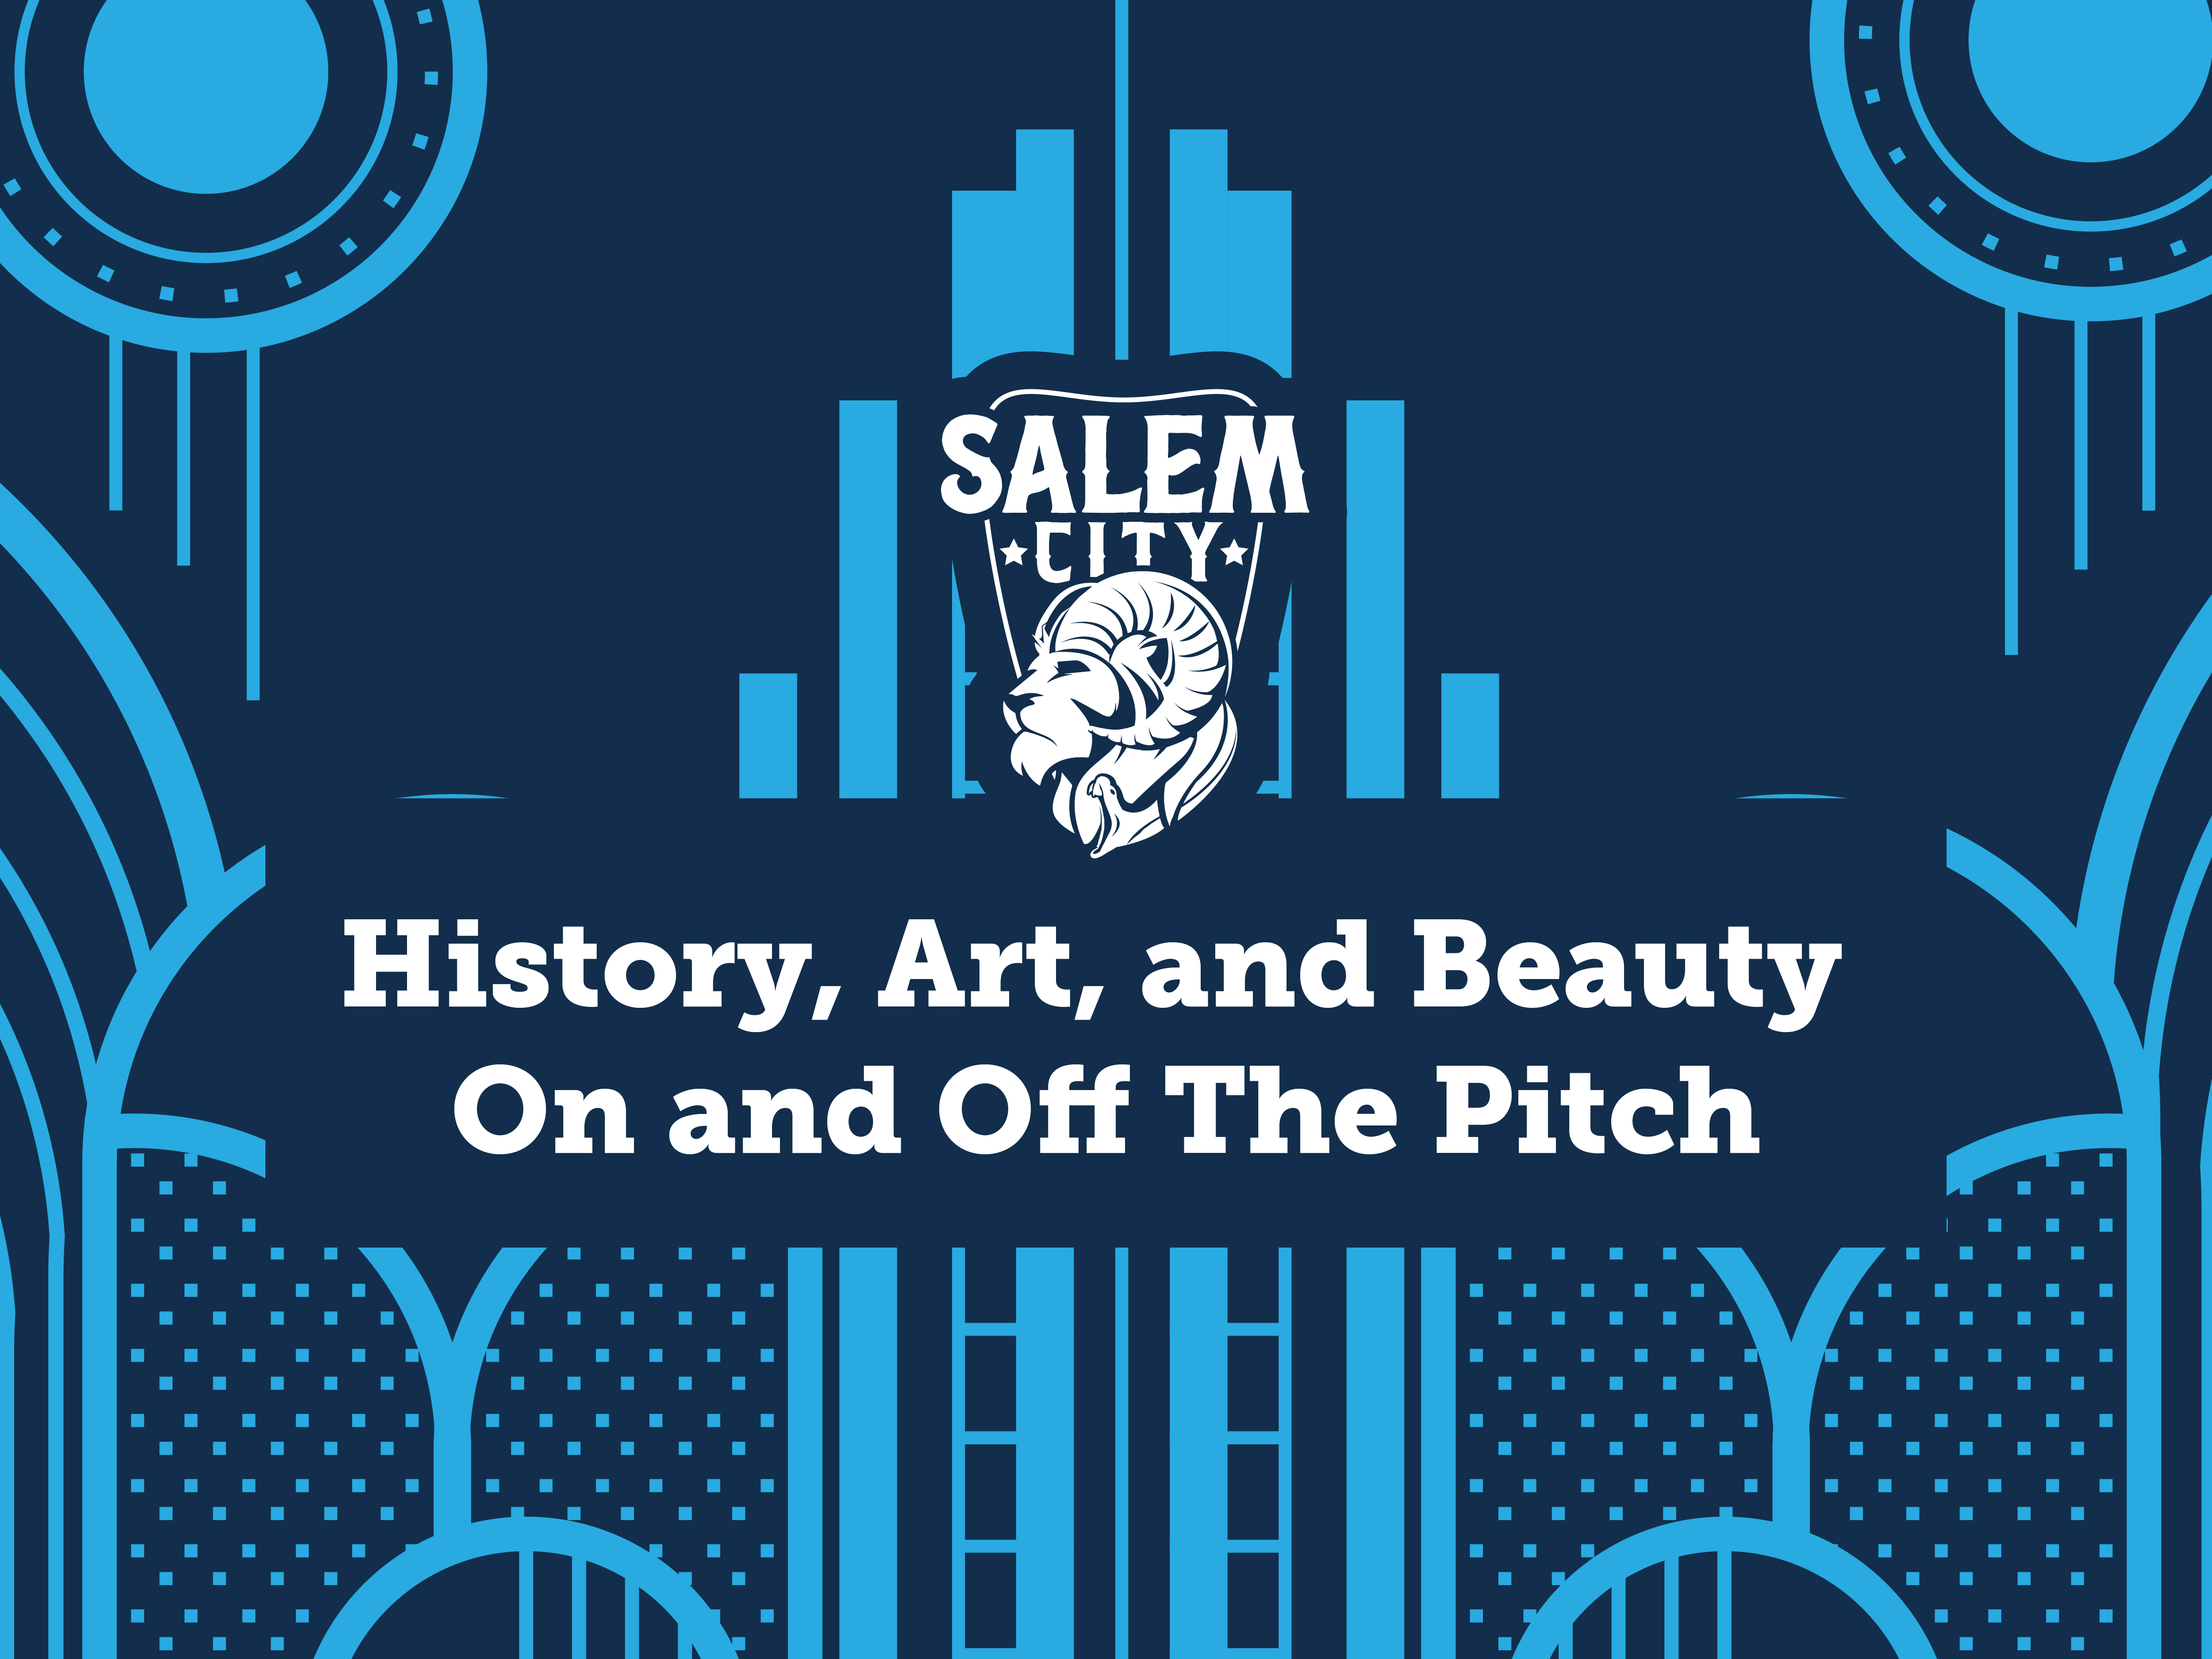 Salem City: History, Art, and Beauty On and Off The Pitch